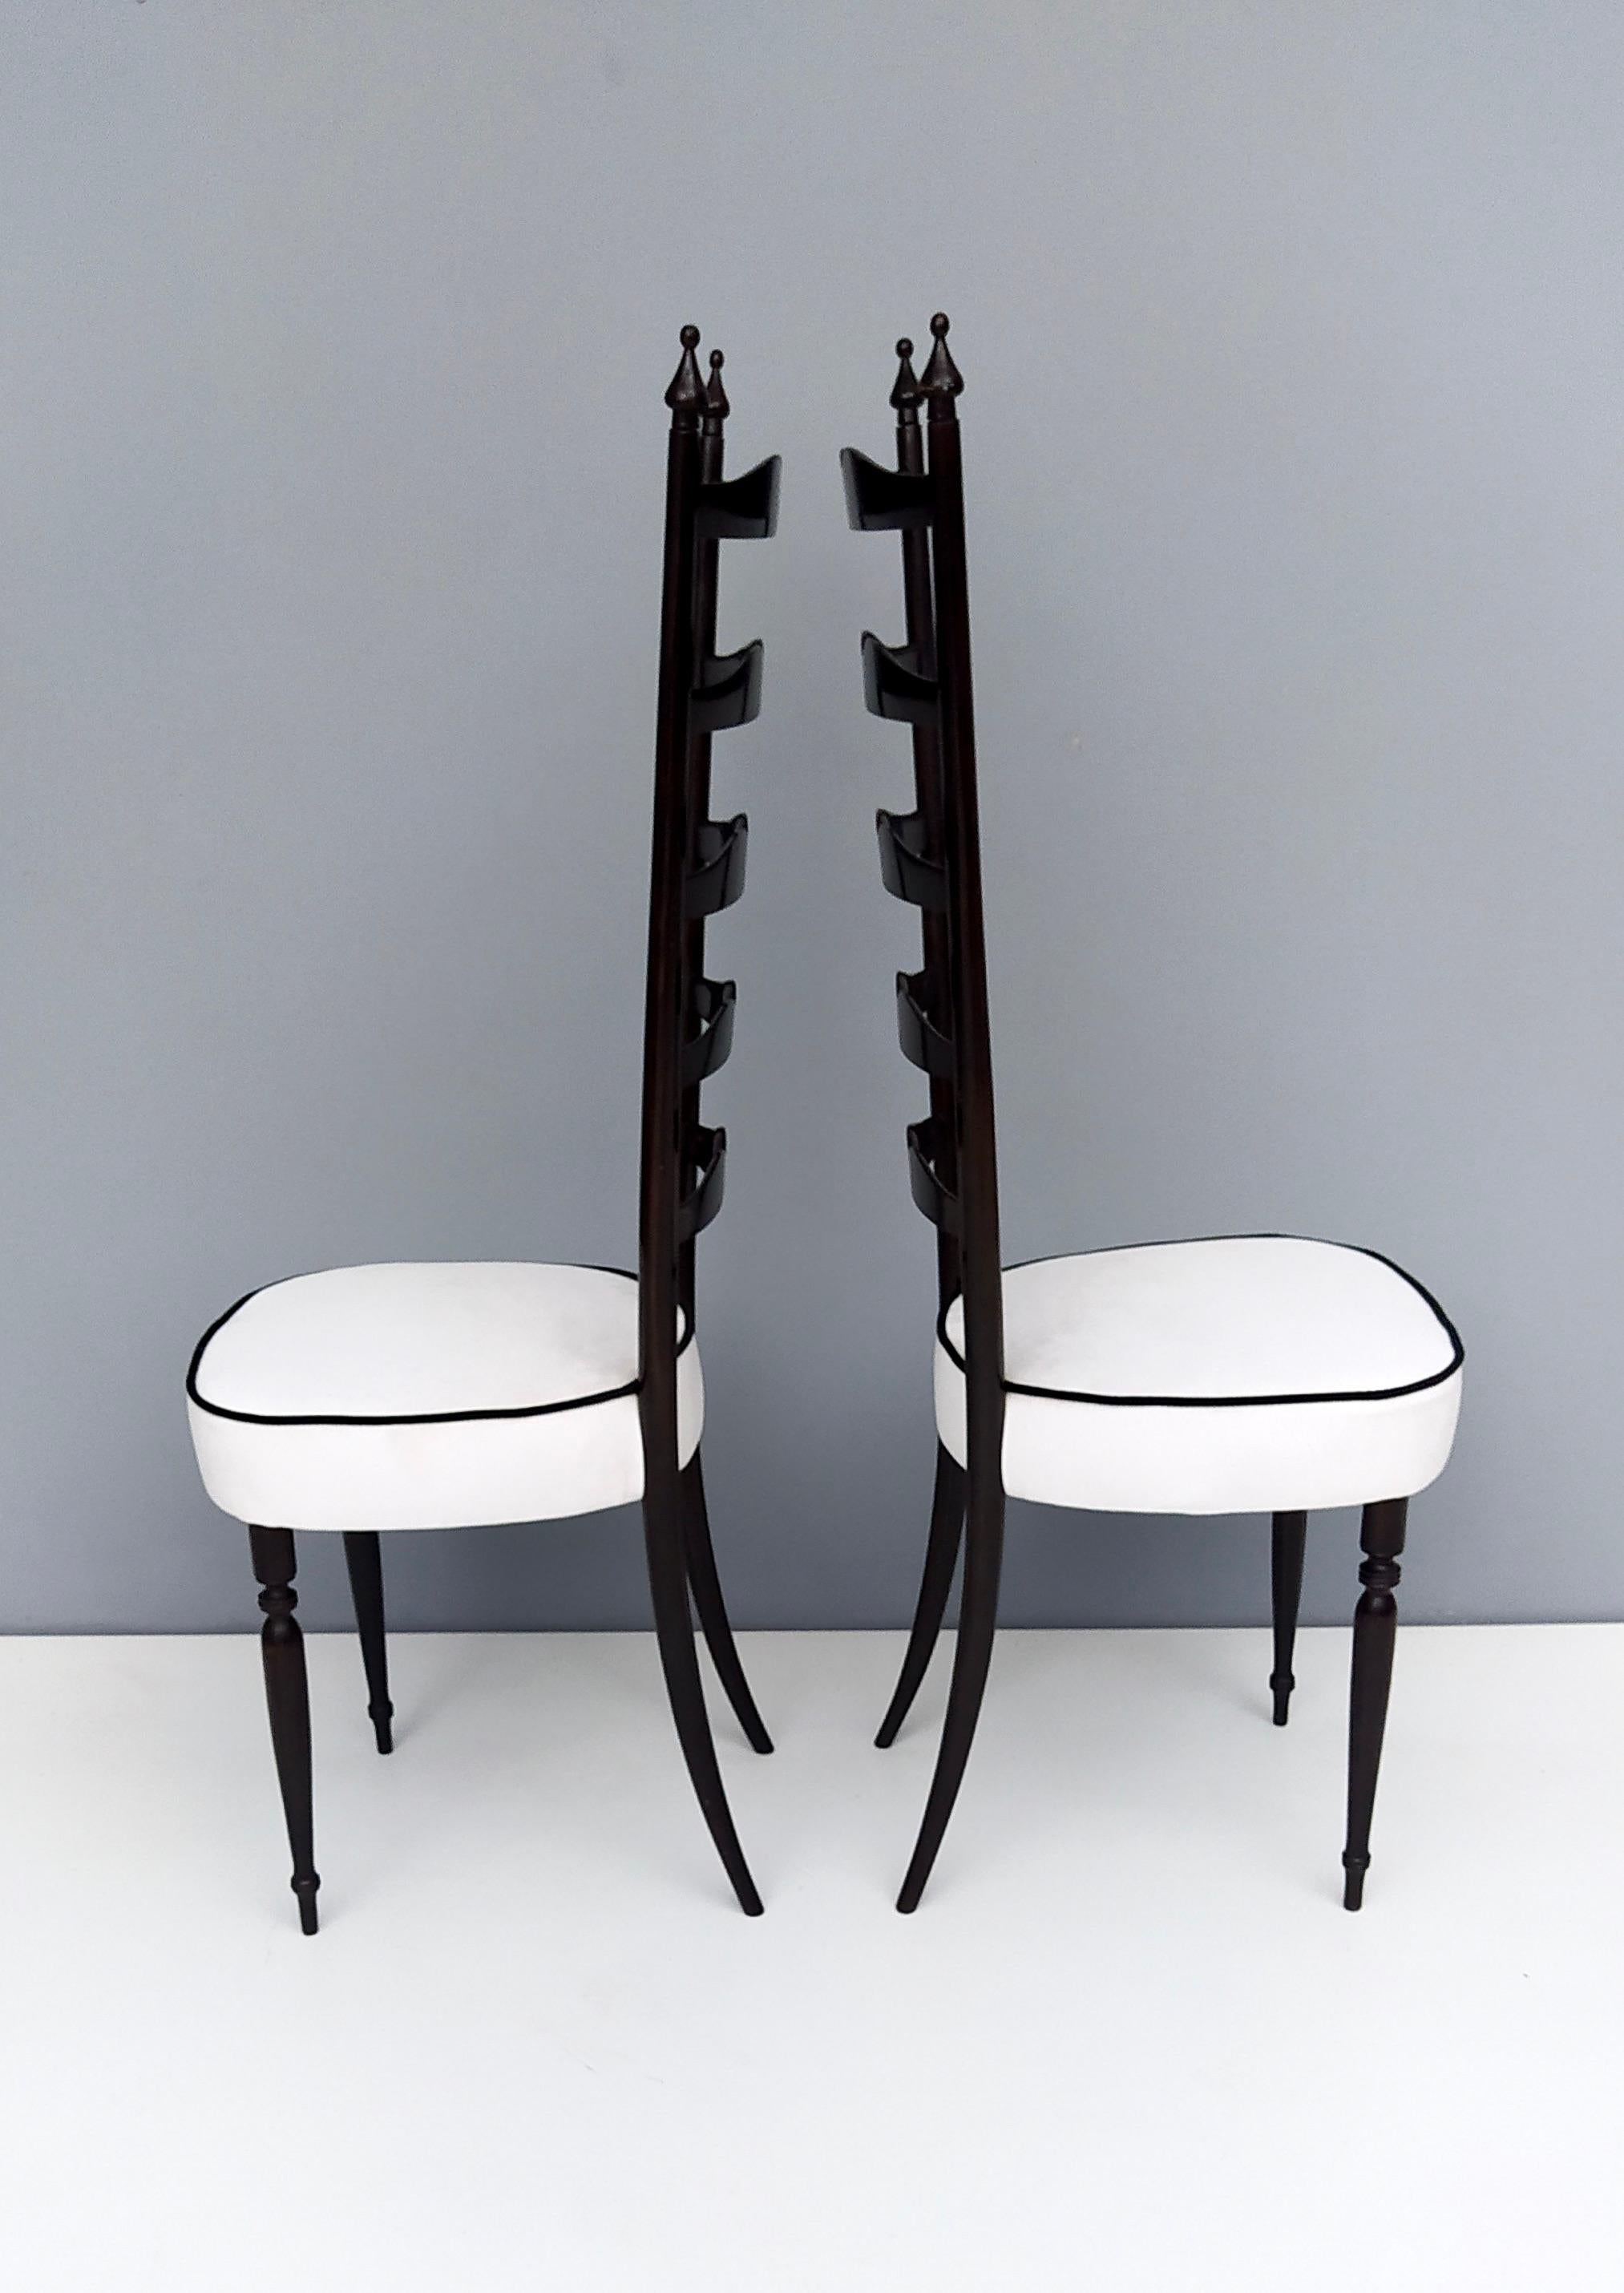 Pair of Vintage Ebonized Beech Chiavarine Chairs with White Upholstery, Italy 1